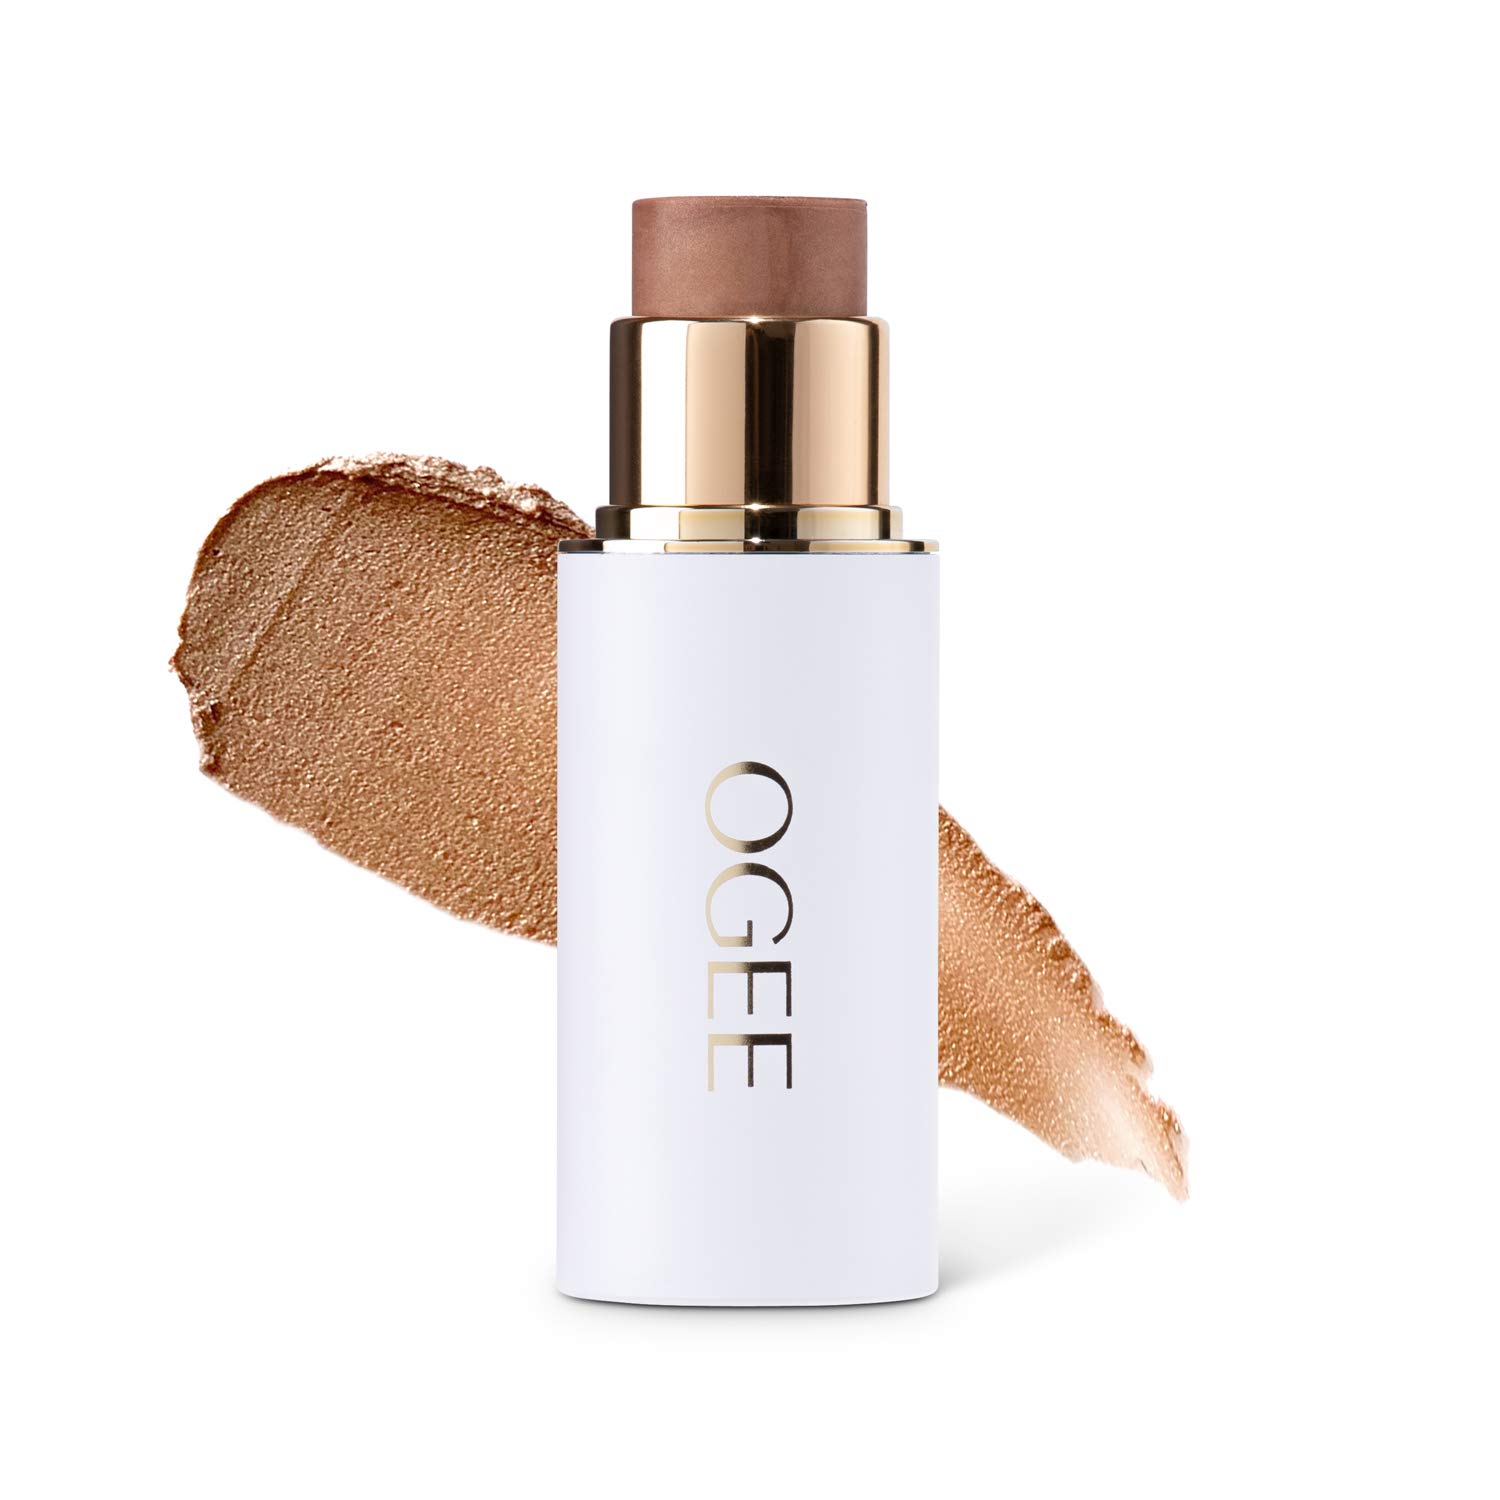 Ogee Sculpted Face Stick (AMBER - SUN KISSED BRONZE) Certified Organic Multi-Use Bronzer or Highlighter Glow Makeup Stick